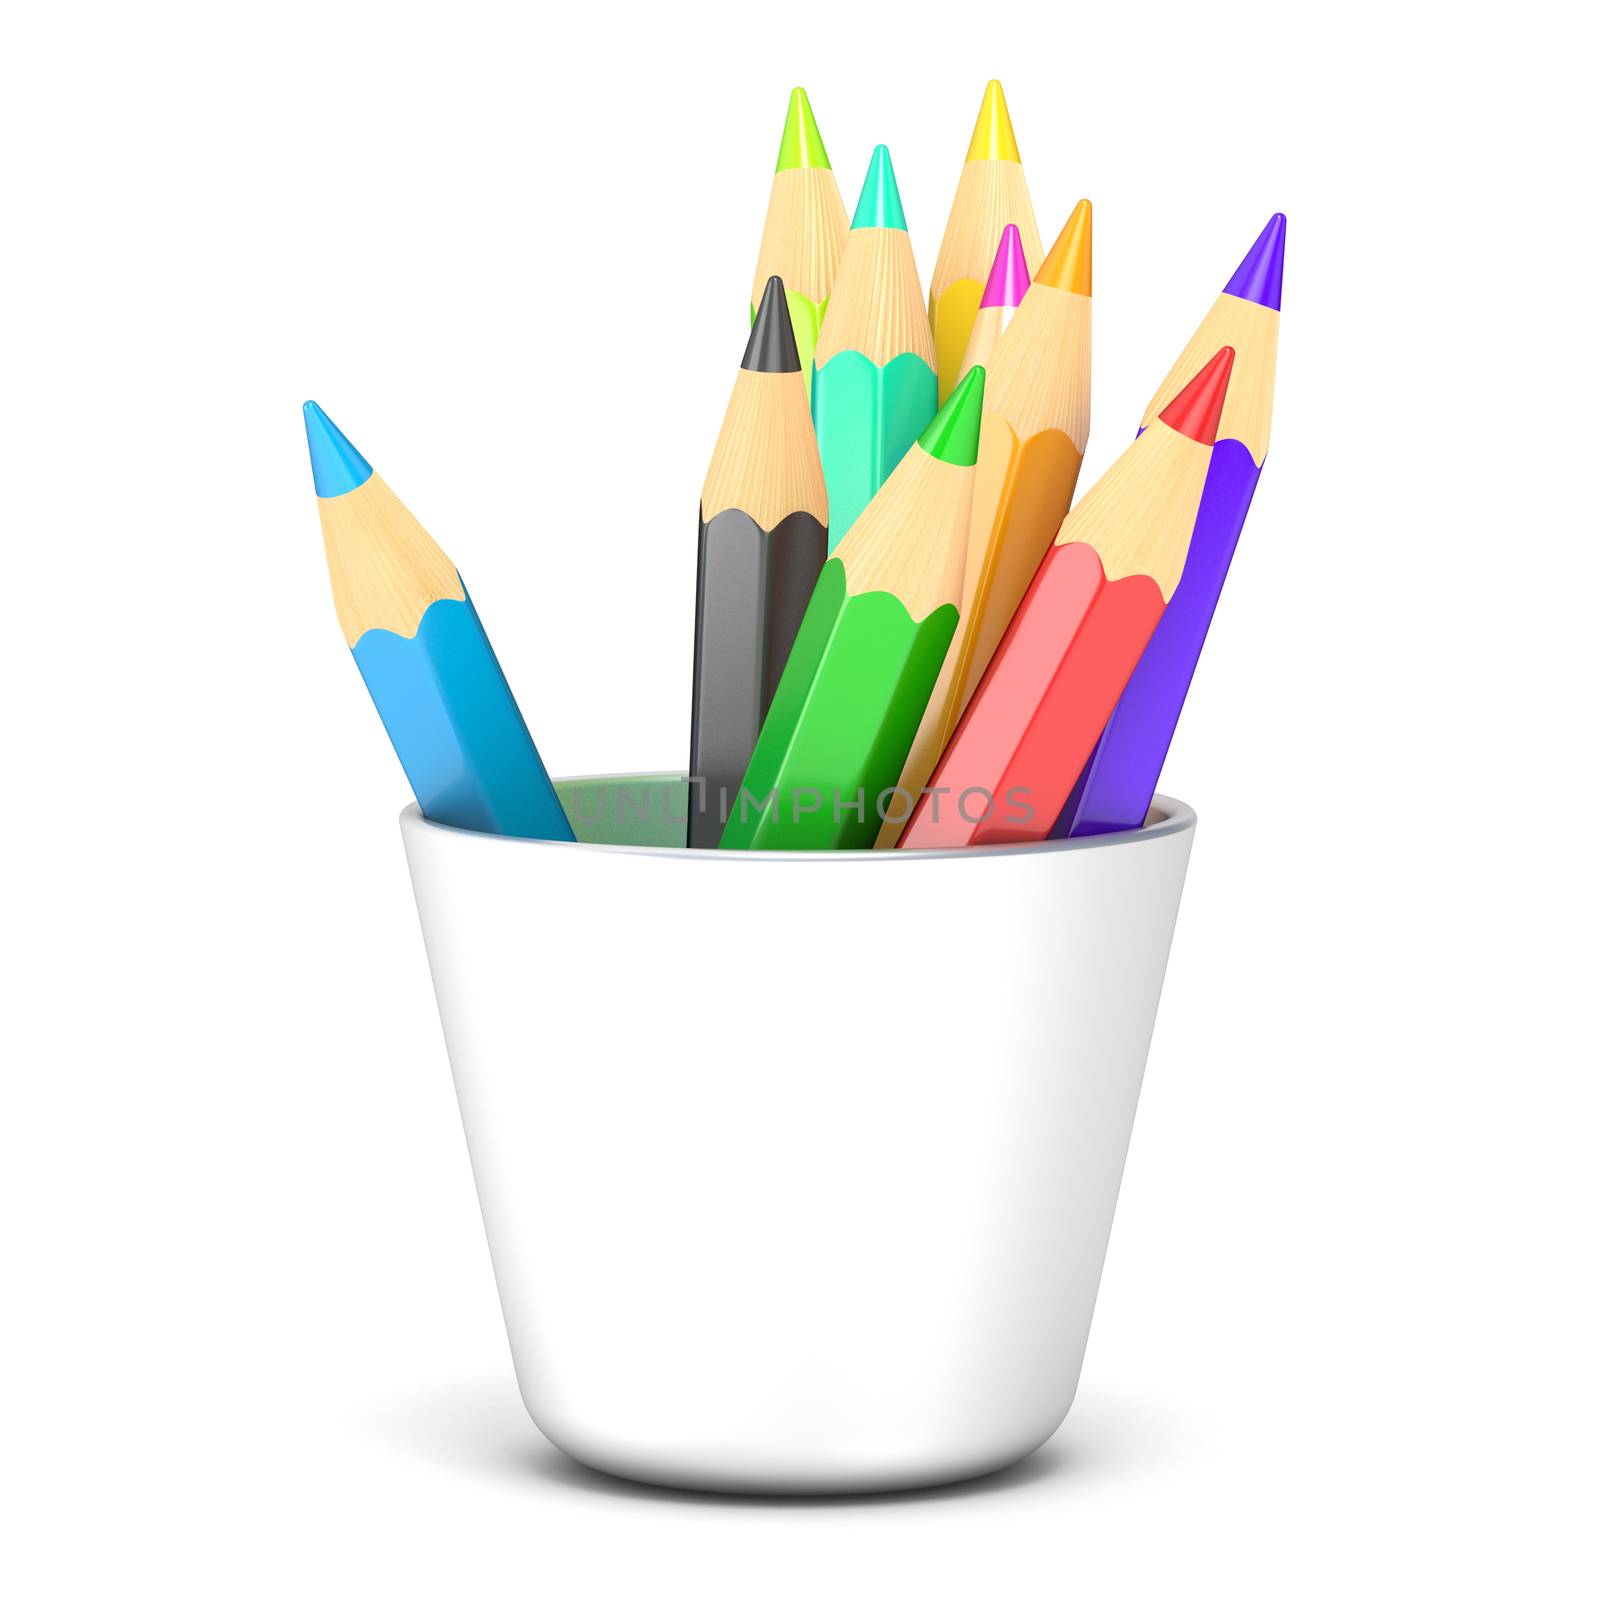 Colored pencils in a white holder. 3D render illustration isolated on white background